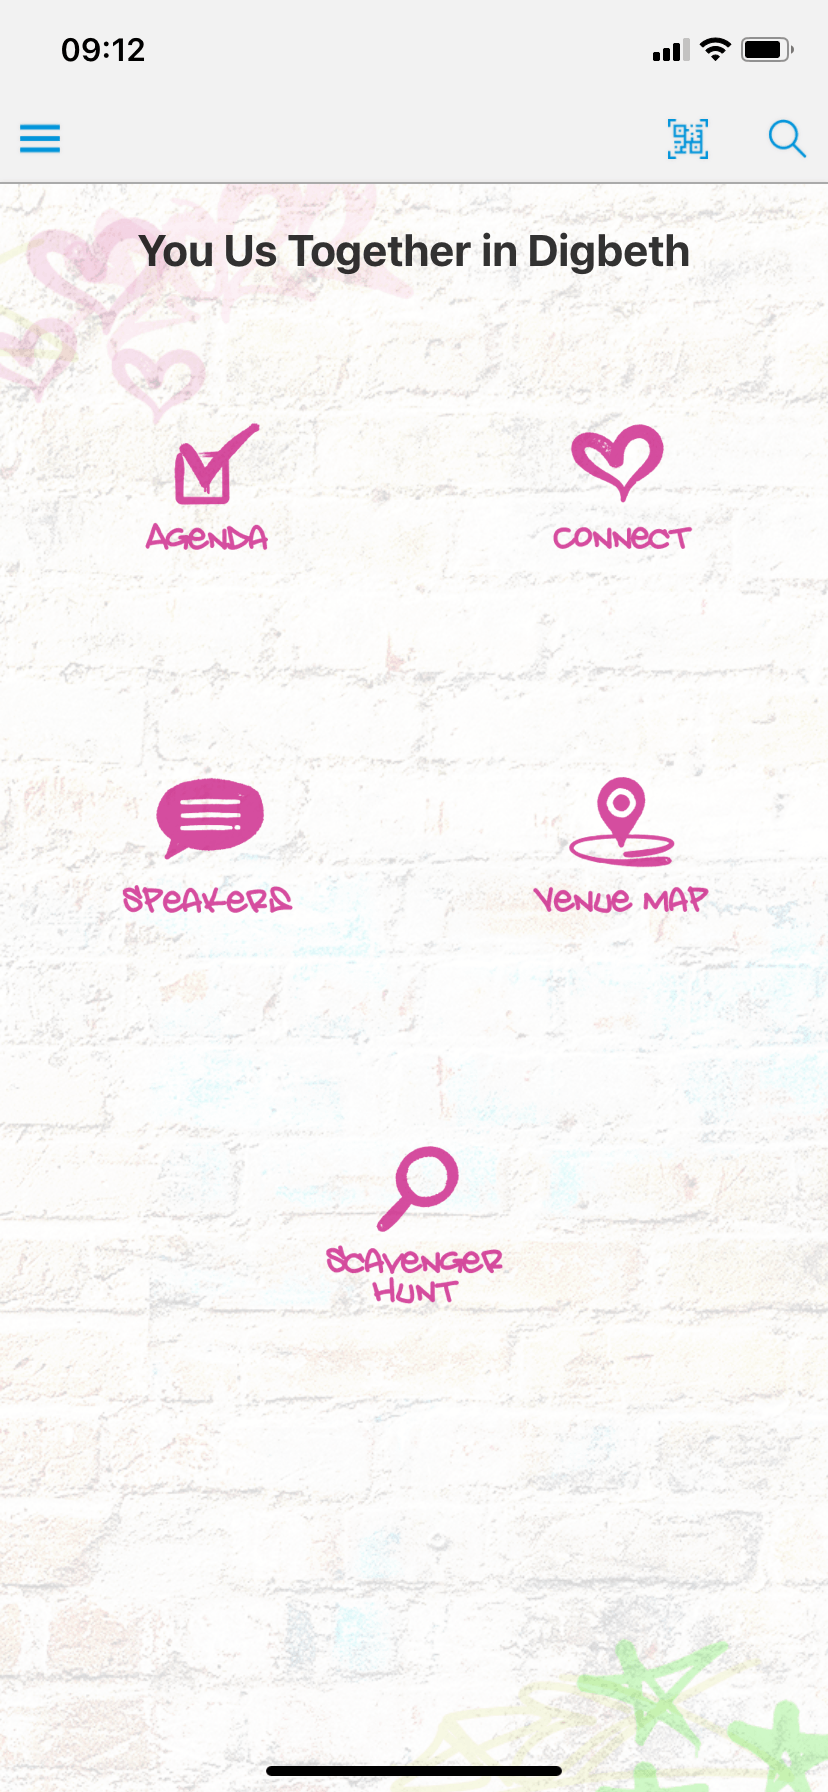 You Us Together in Digbeth menu in the event app by VenuIQ